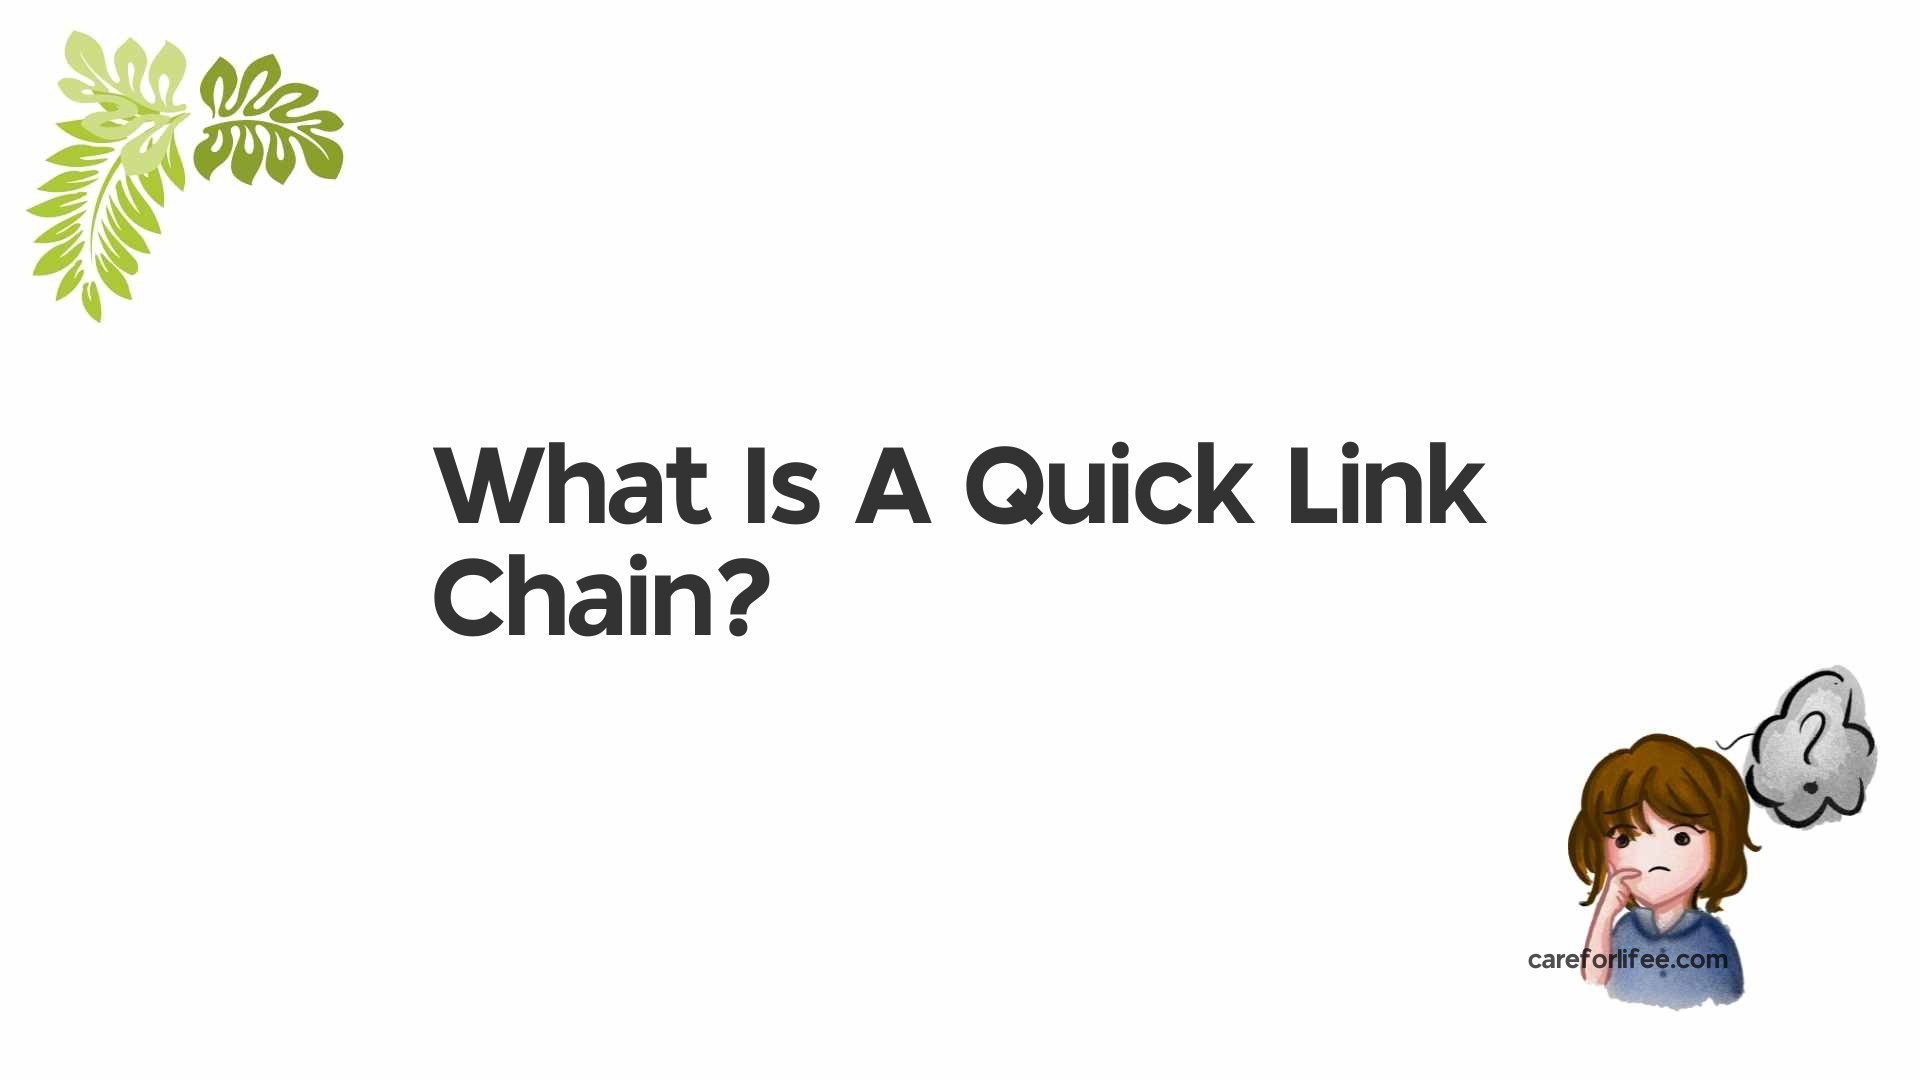 What Is A Quick Link Chain?